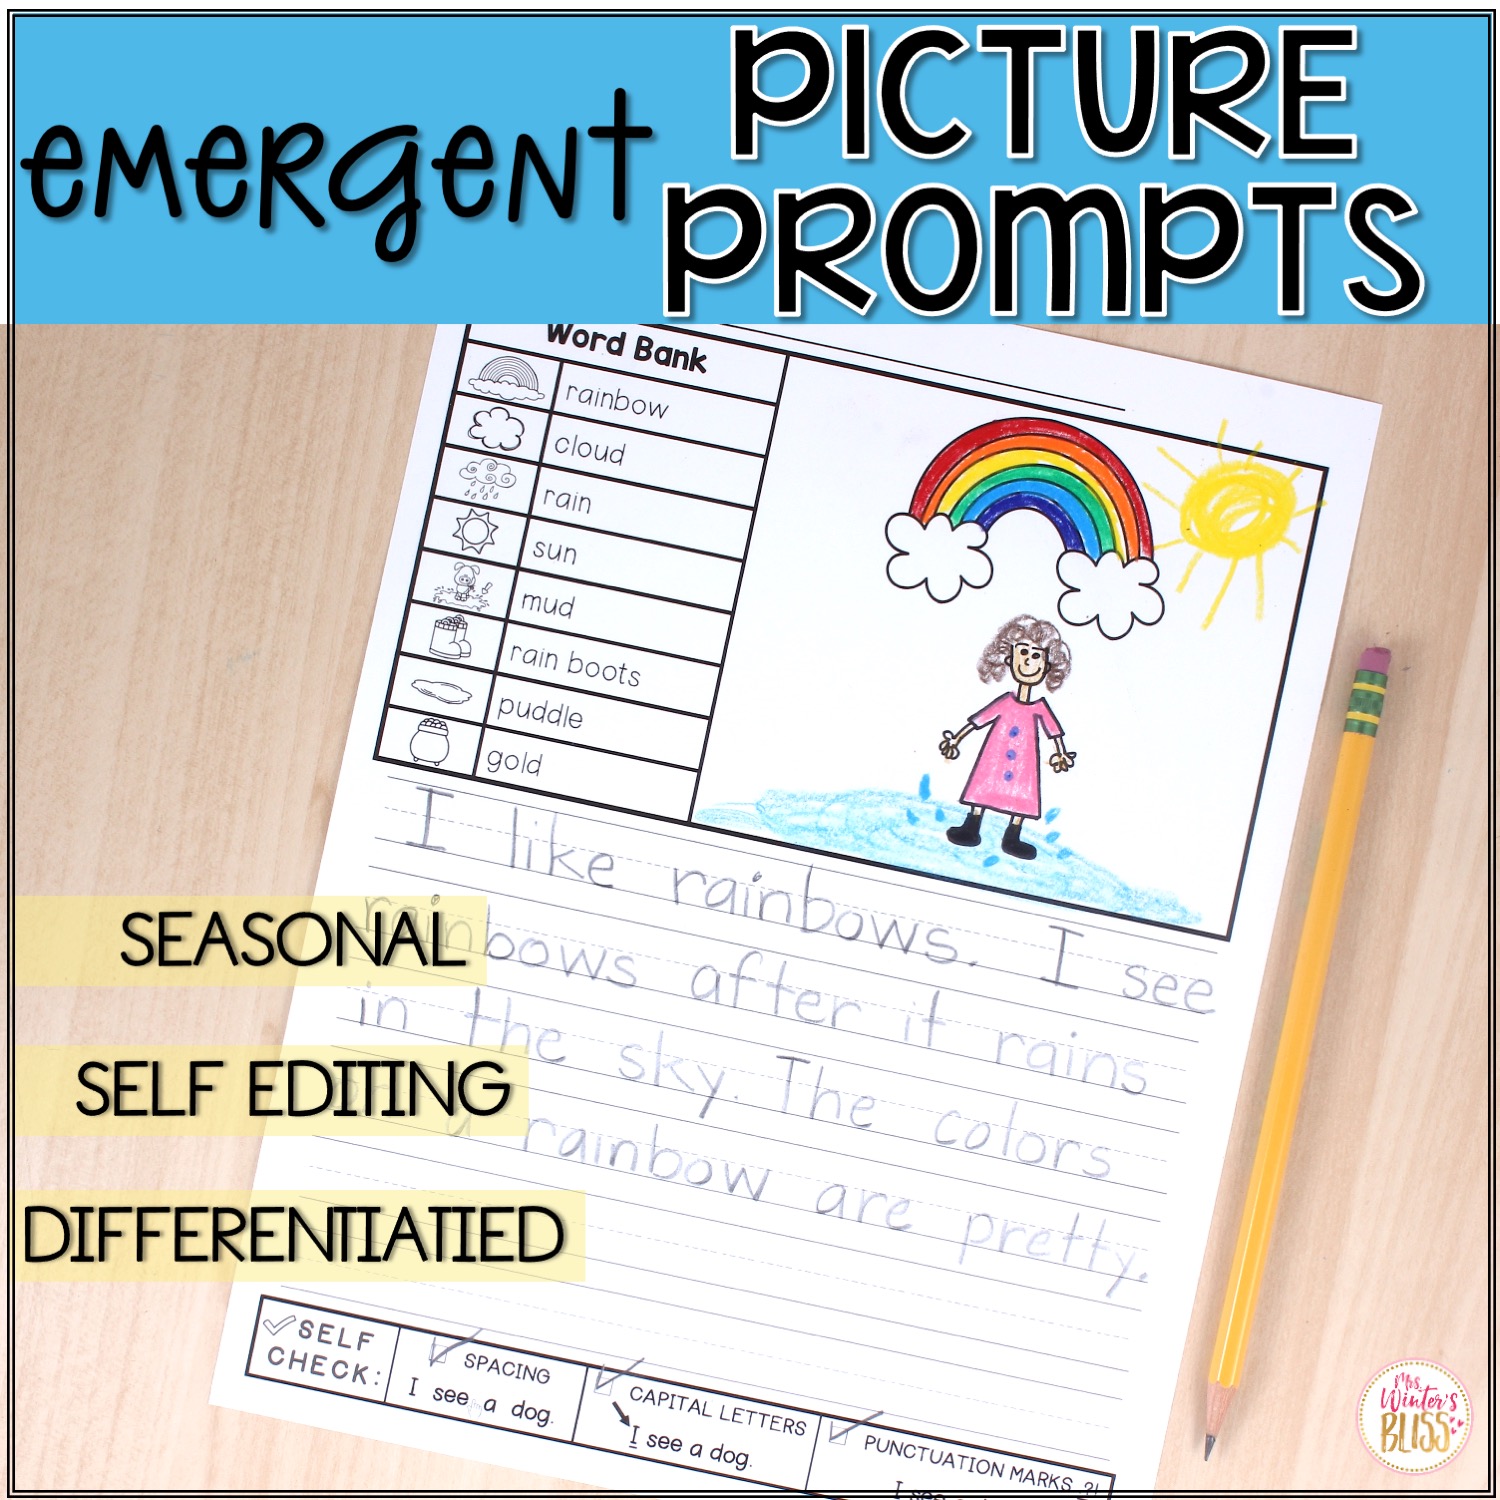 writing prompts special education